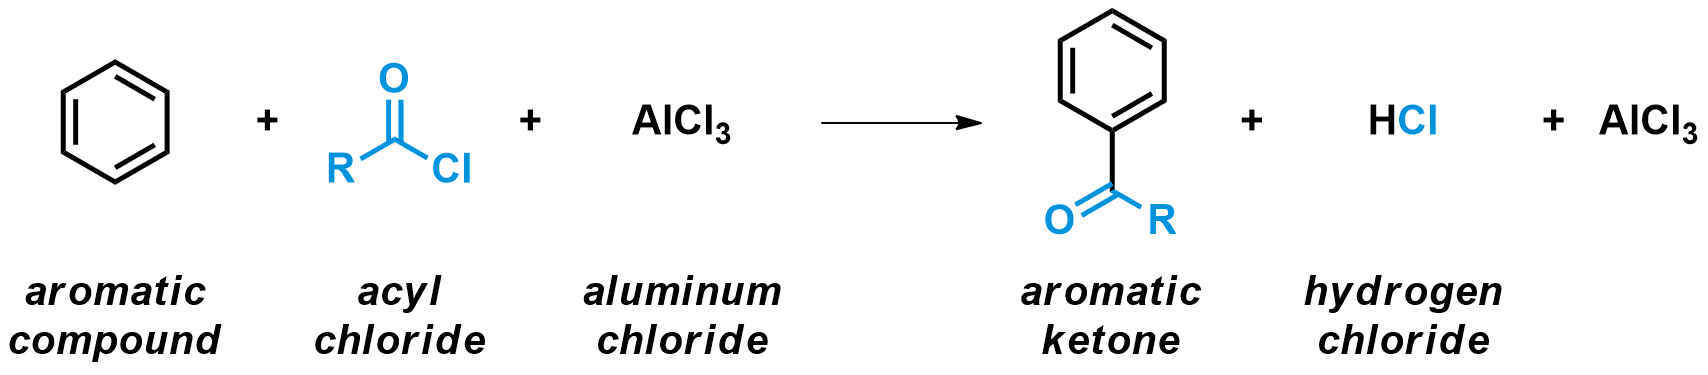 Generic Friedel-Crafts acylation of an aromatic compound with an acyl chloride.